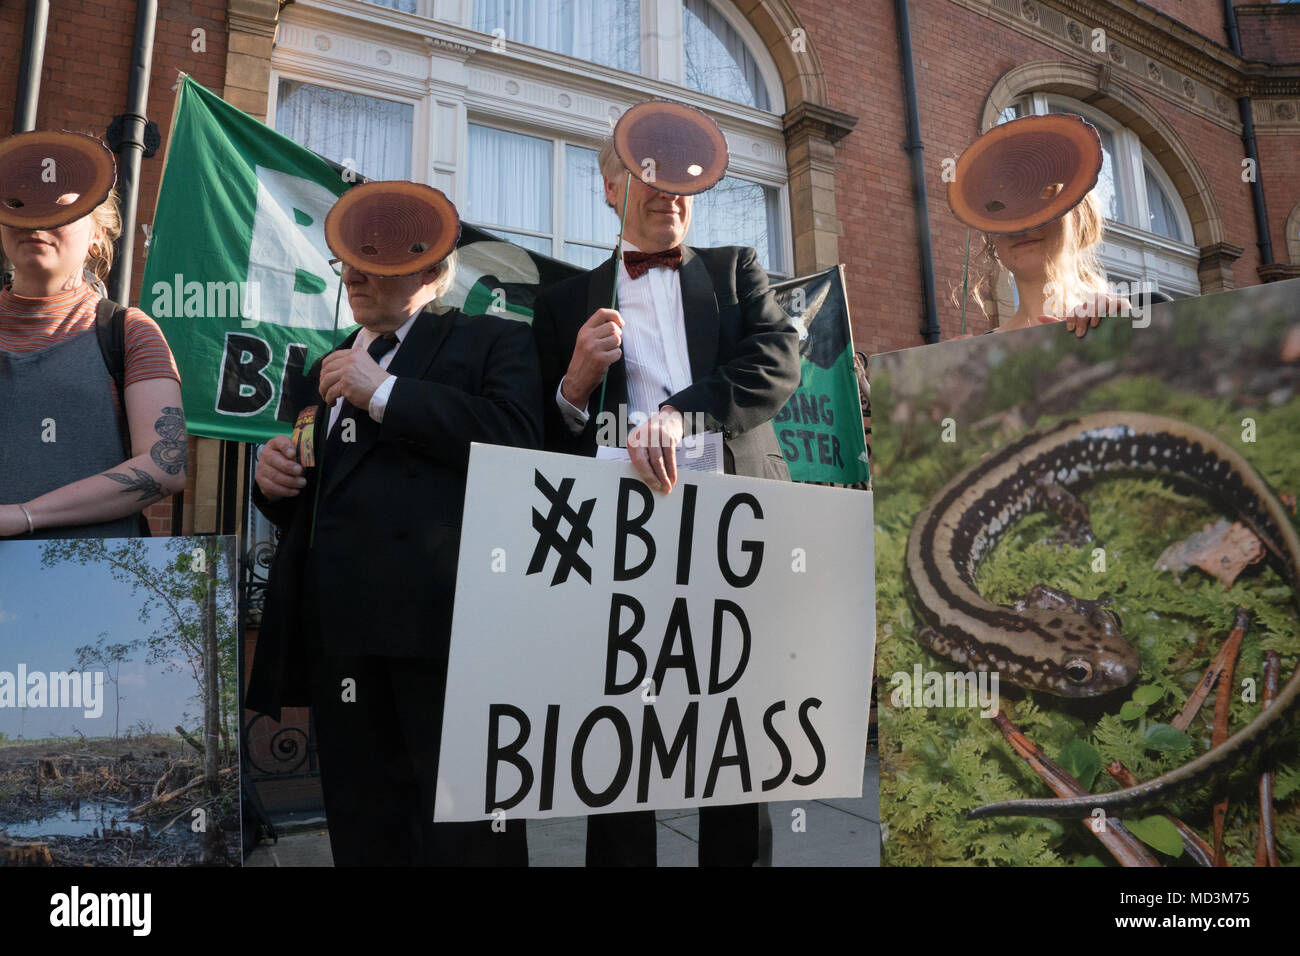 London, UK. 18 April 2018. Demonstrators protesting outside a conference about Biomass in the Landmark Hotel in London. Photo date: Wednesday, April 18, 2018. Photo: Roger Garfield/Alamy Live News Stock Photo